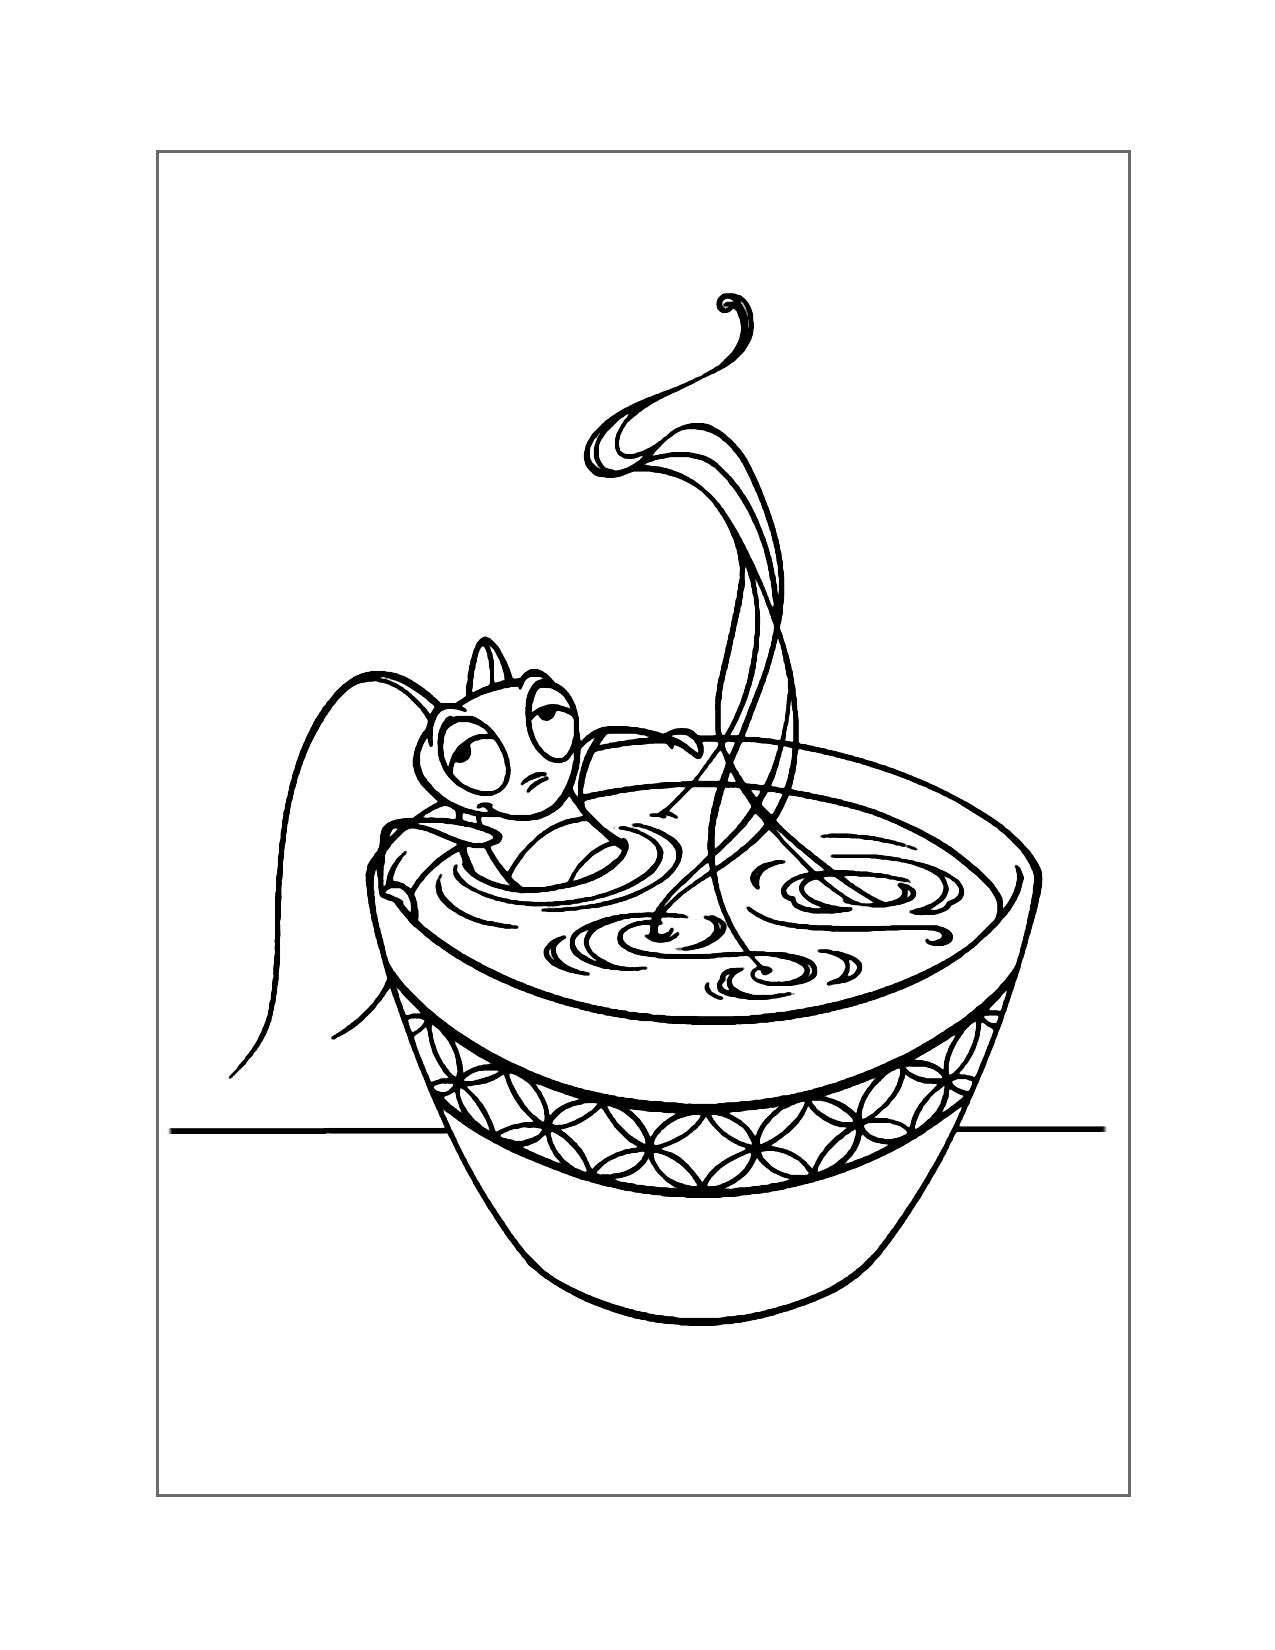 Crikee Tea Cup Hot Tub Coloring Page